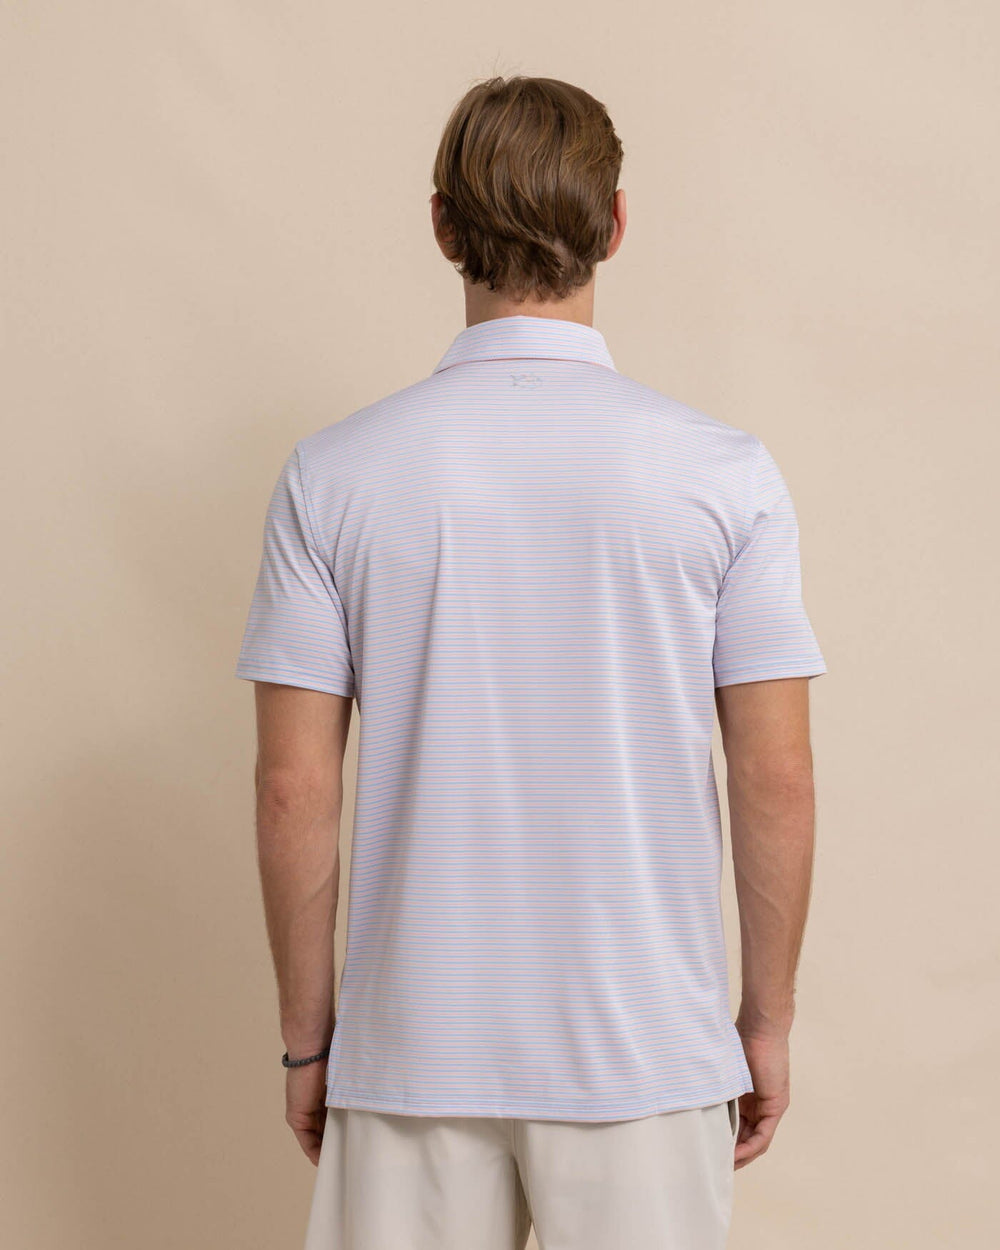 The back view of the Southern Tide Driver Verdae Stripe Polo by Southern Tide - Apricot Blush Coral